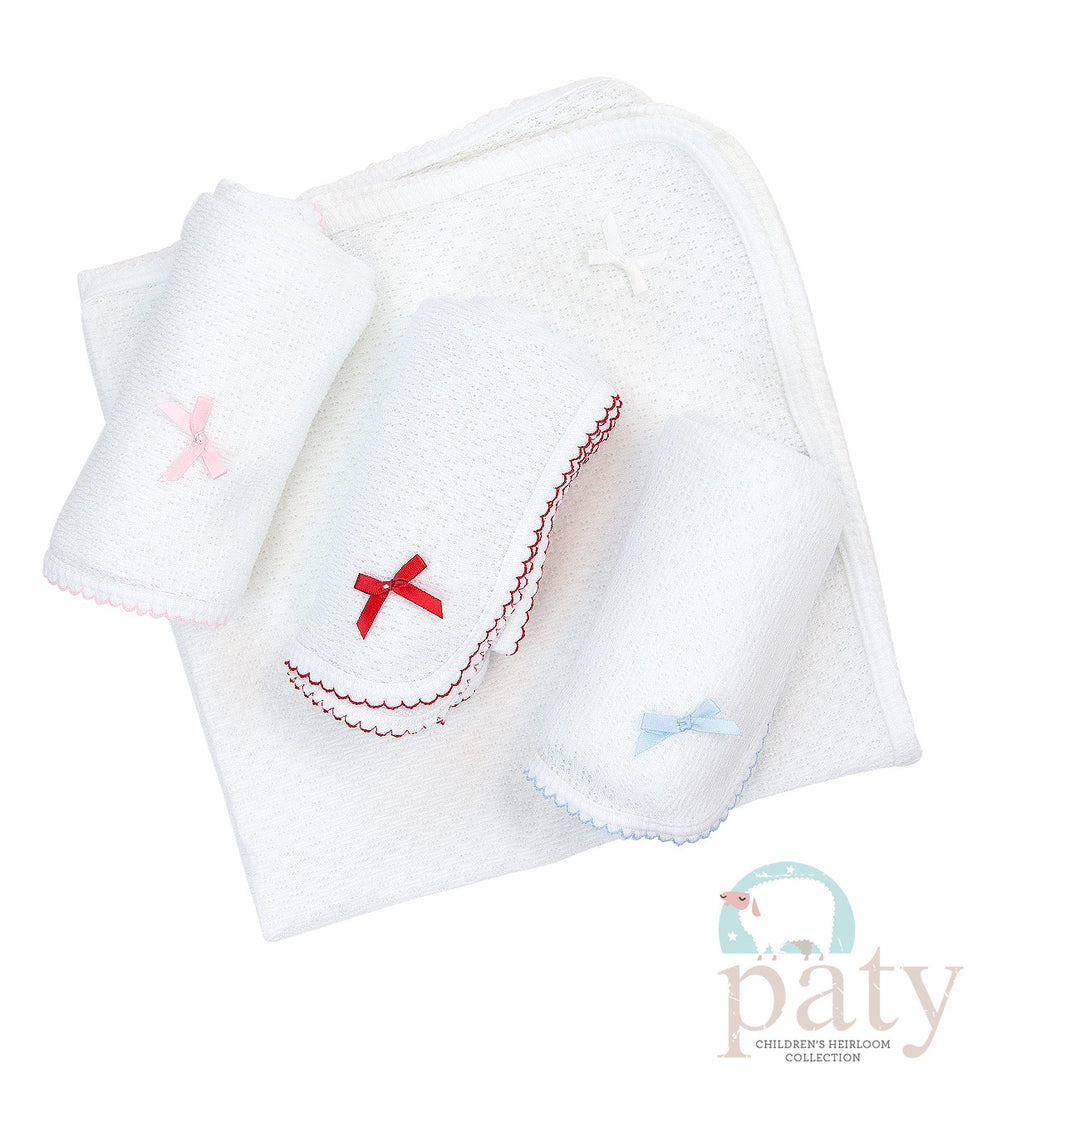 Paty Receiving Blanket - White/Pink